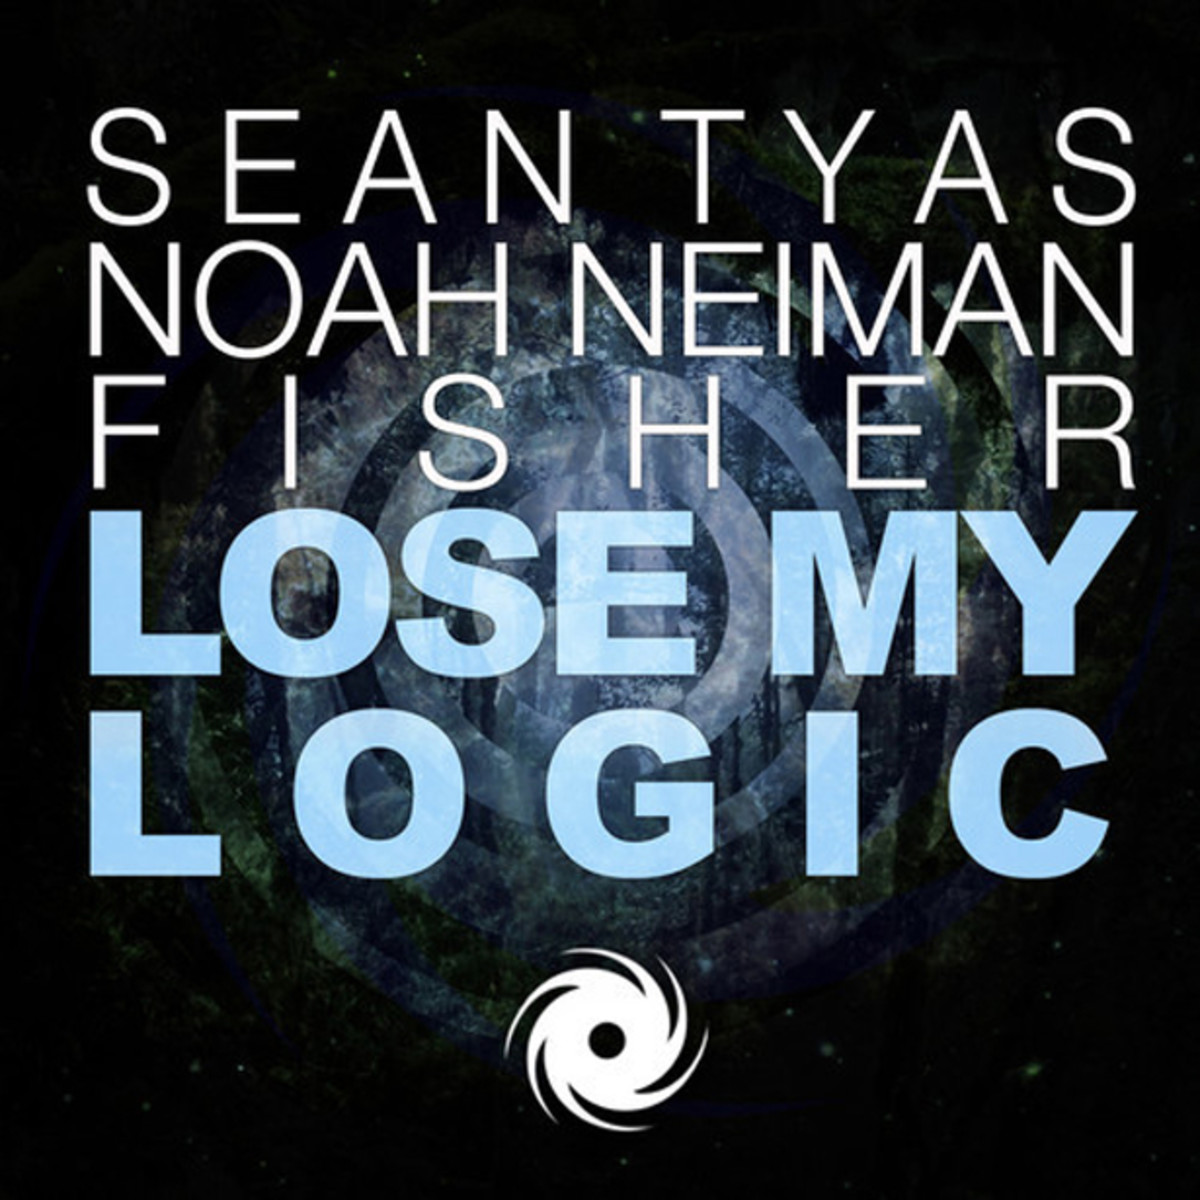 Exclusive Premier: Sean Tyas & Noah Neiman With Fisher "Lose My Logic" On Black Hole Recordings